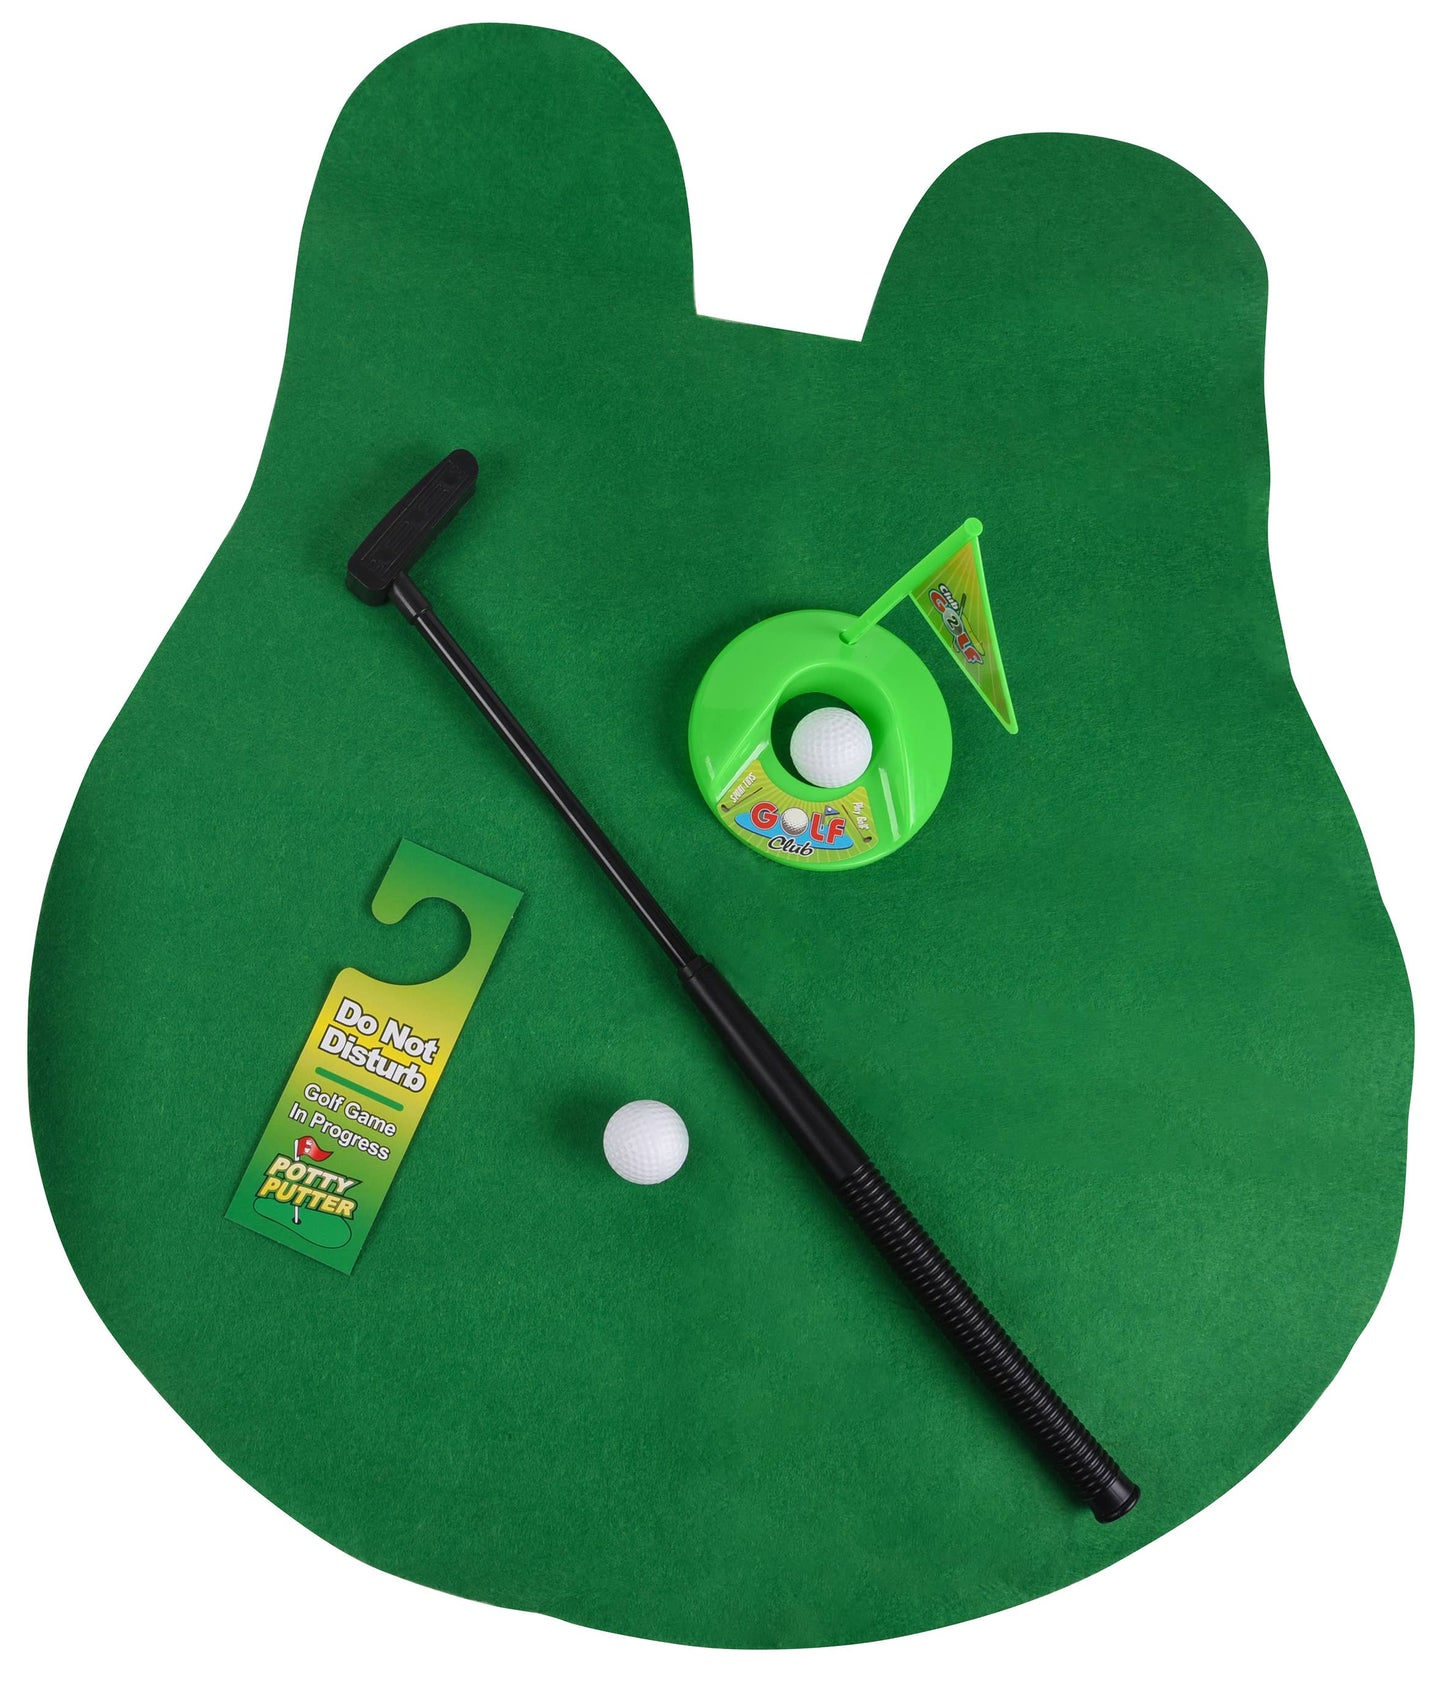 Toilet Golf - Novelty Gifts, Golf Gifts